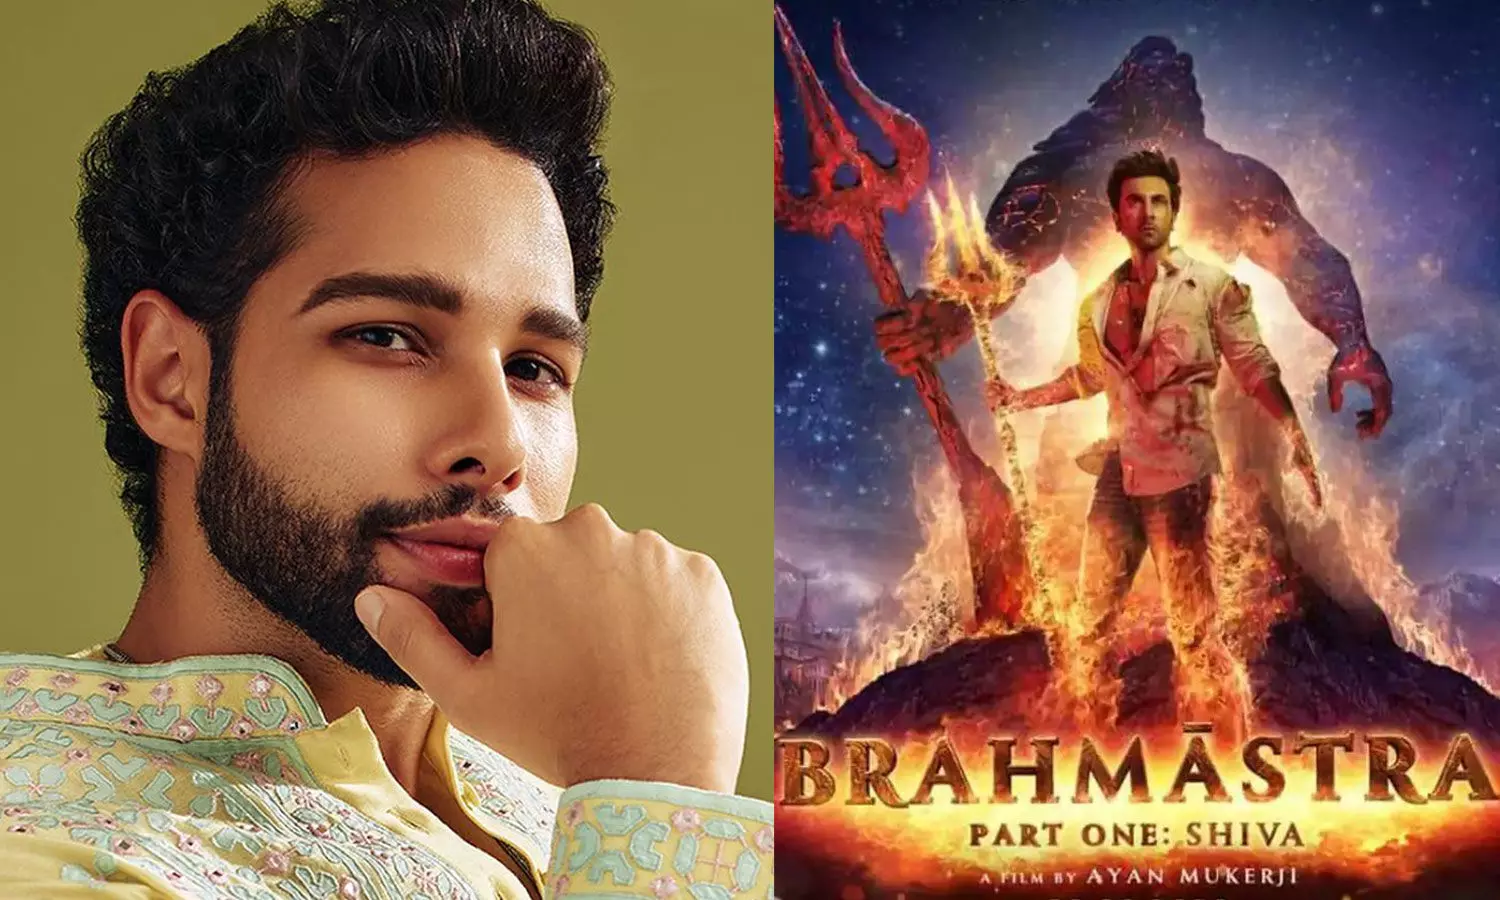 Siddhant Chaturvedi Shares Experience of Being Shunned After Turning Down Brahmastra Role